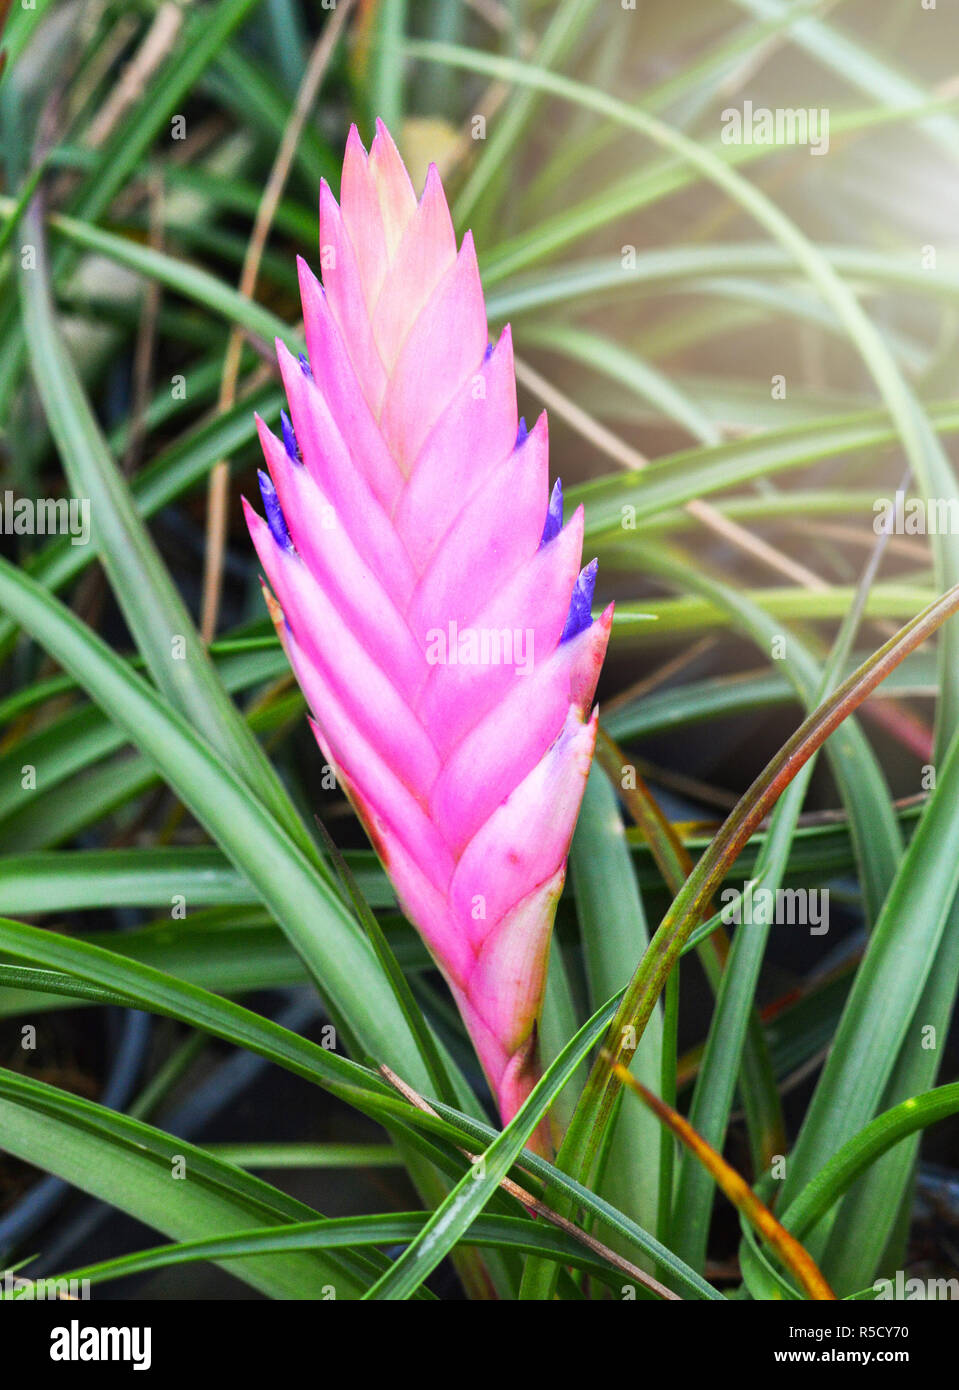 purple bromeliad flower / beautiful of ornamental plants garden in the green house with bromeliad purple pink flower nature green blur background / co Stock Photo